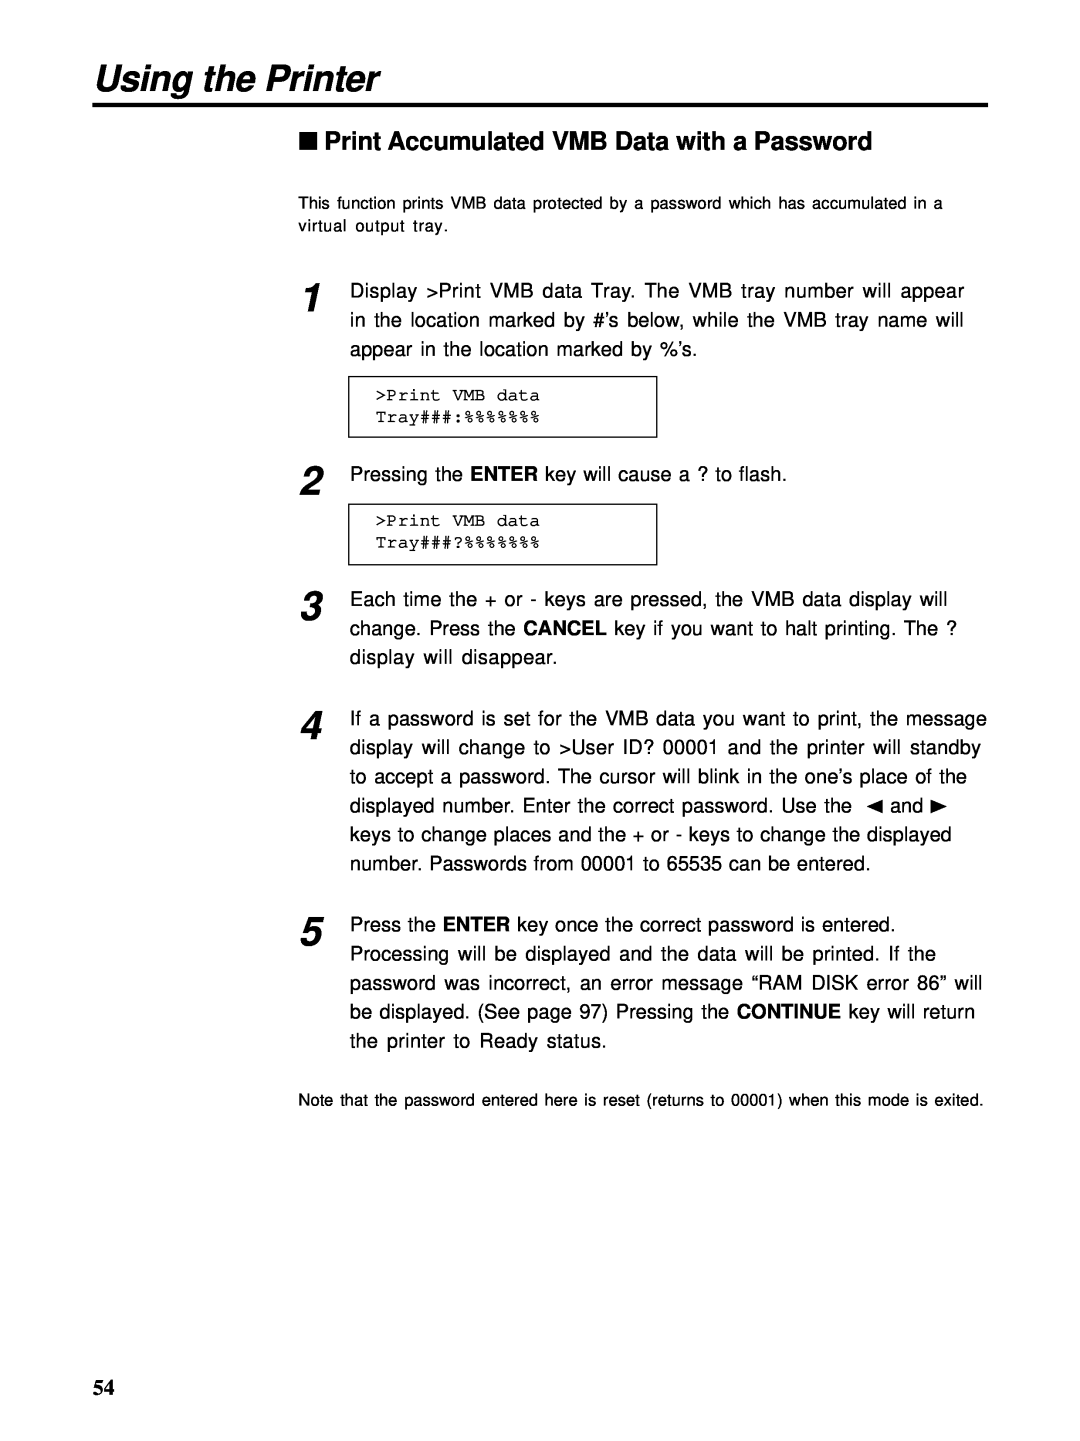 HP Ci 1100 manual Print Accumulated VMB Data with a Password, Using the Printer 